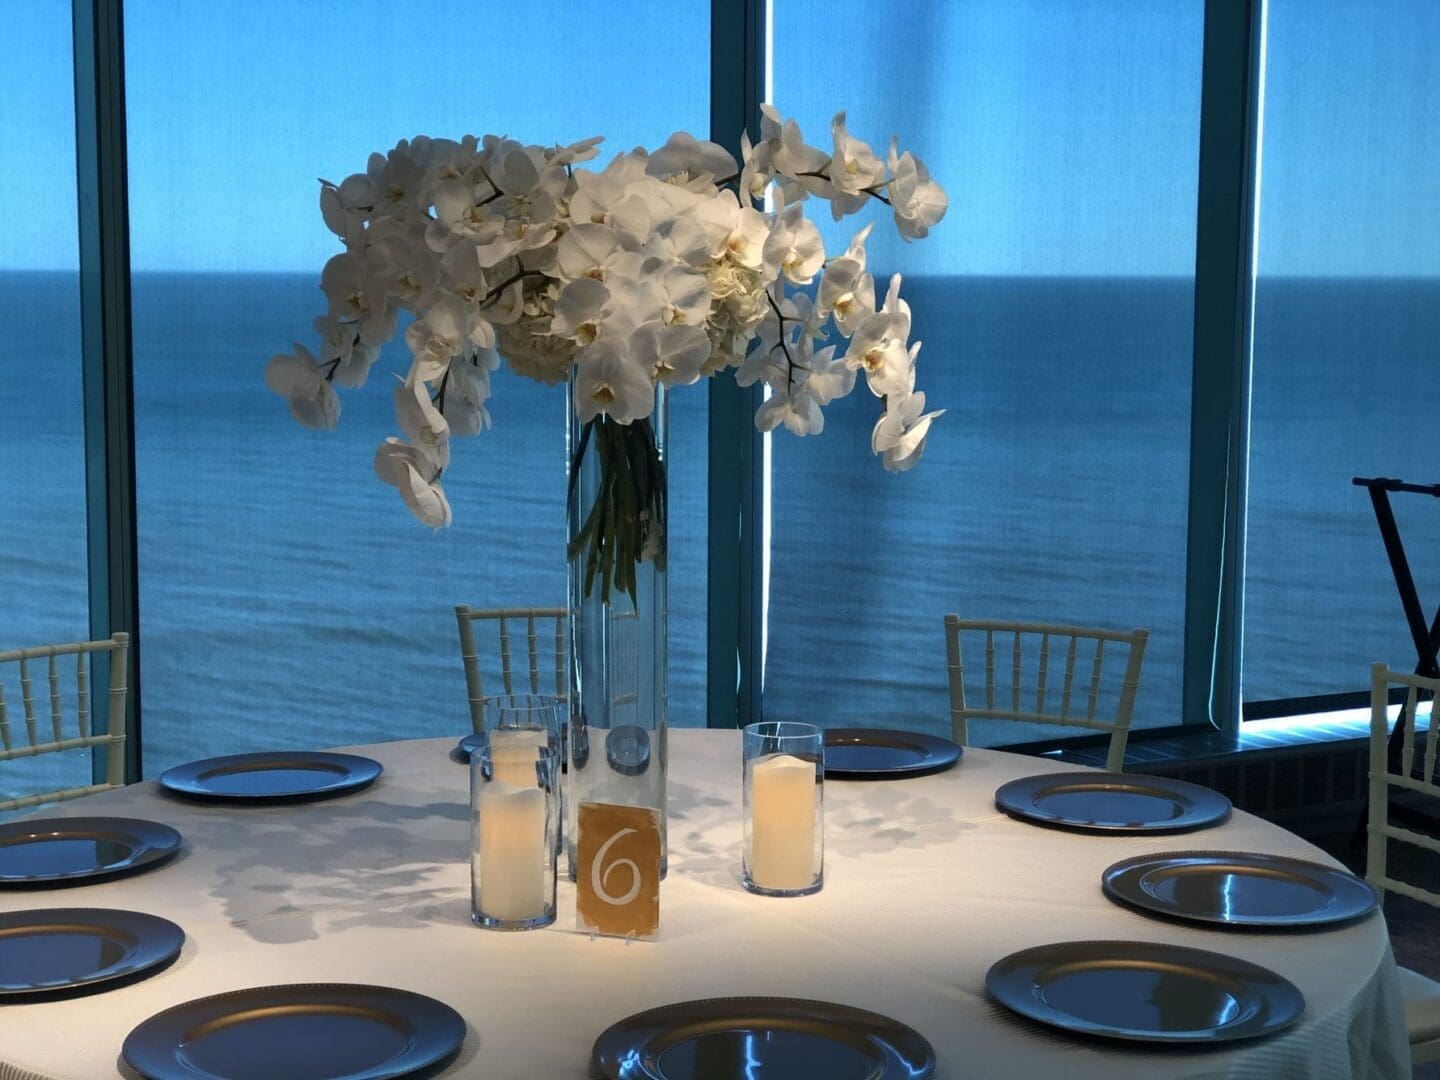 A stunning tablescape featuring a beautiful vase of flowers and a picturesque ocean view, perfect for wedding receptions.